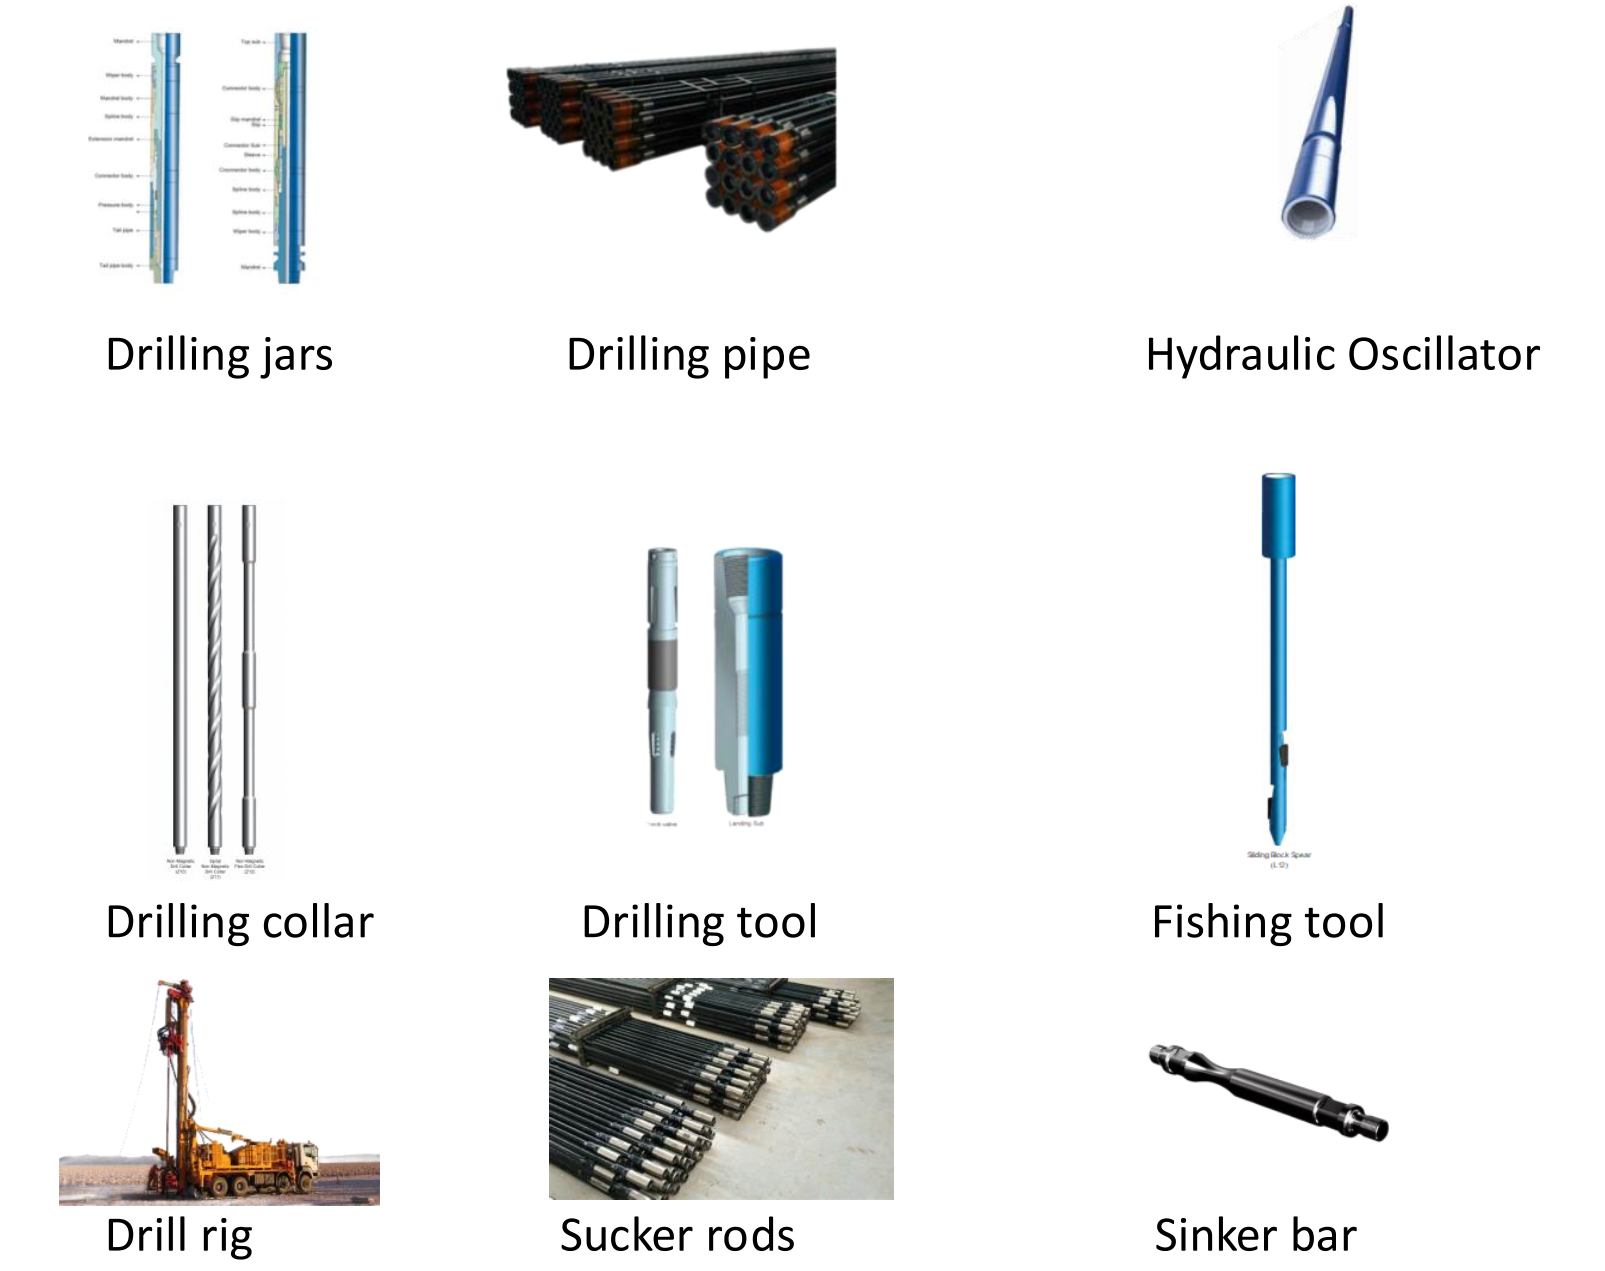 Drilling products